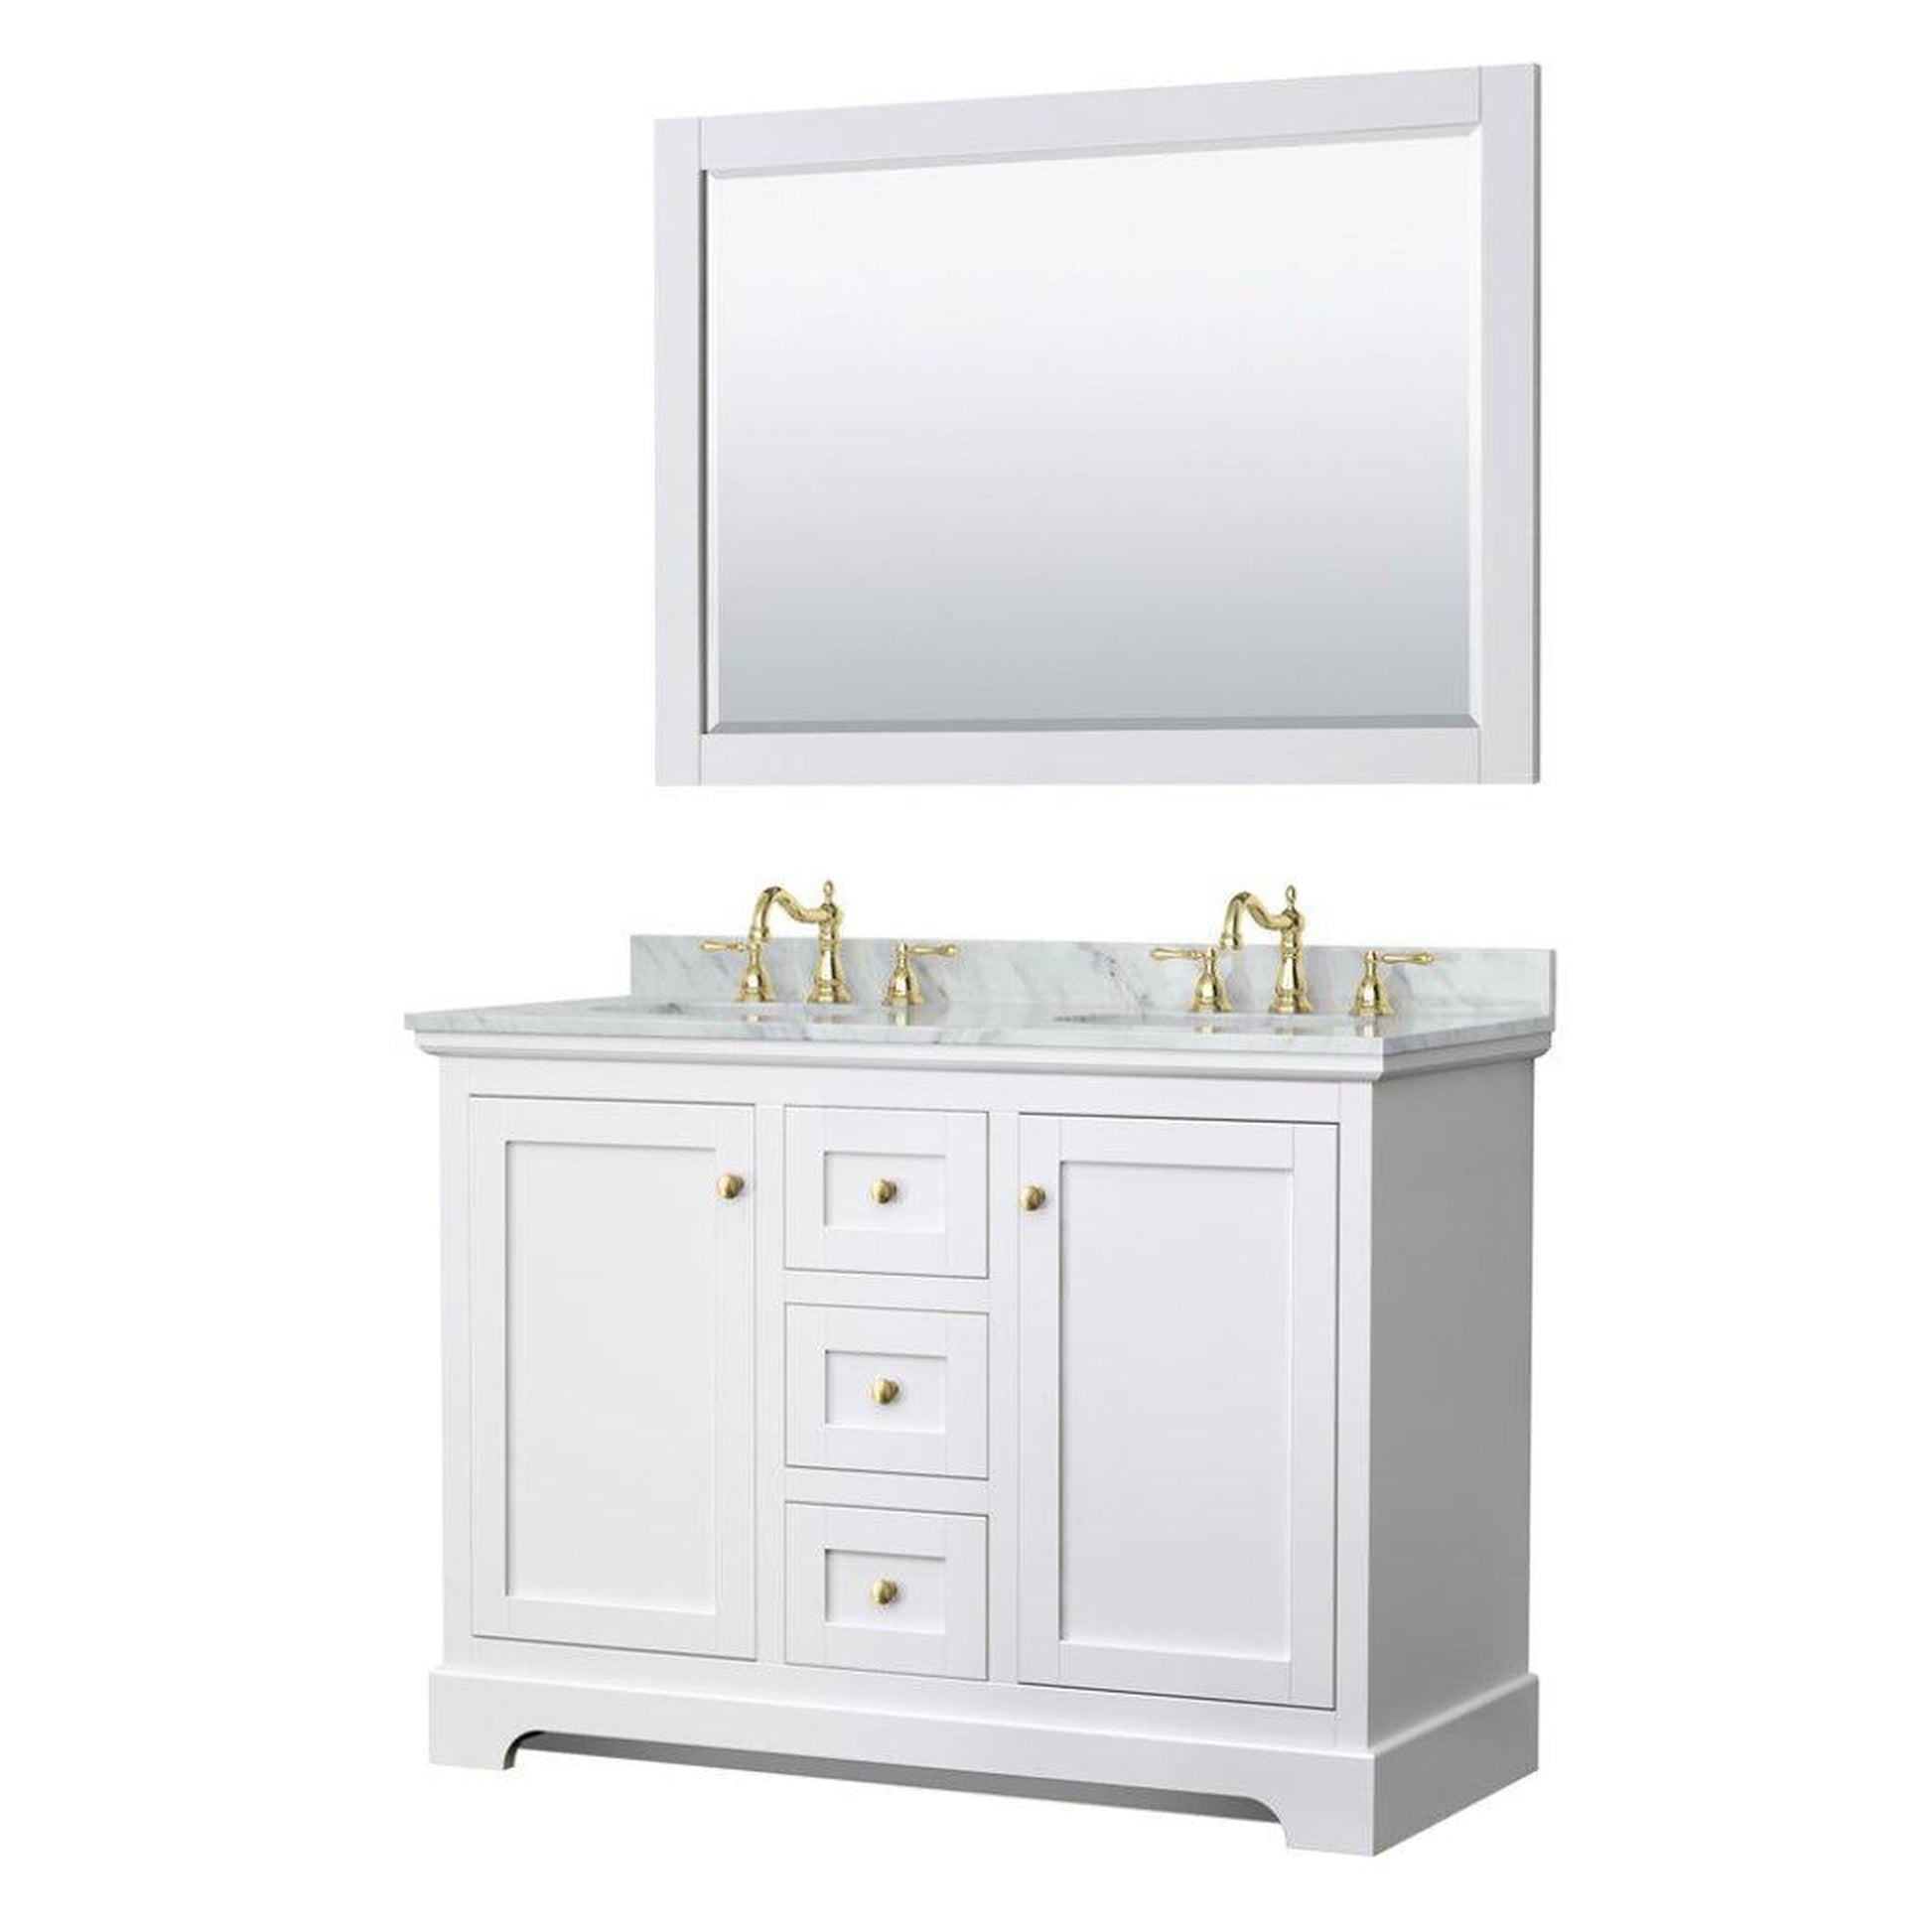 Wyndham Collection Avery 48" White Double Bathroom Vanity Set, White Carrara Marble Countertop With 3-Hole Faucet, 8" Oval Sink, 46" Mirror, Gold Trims